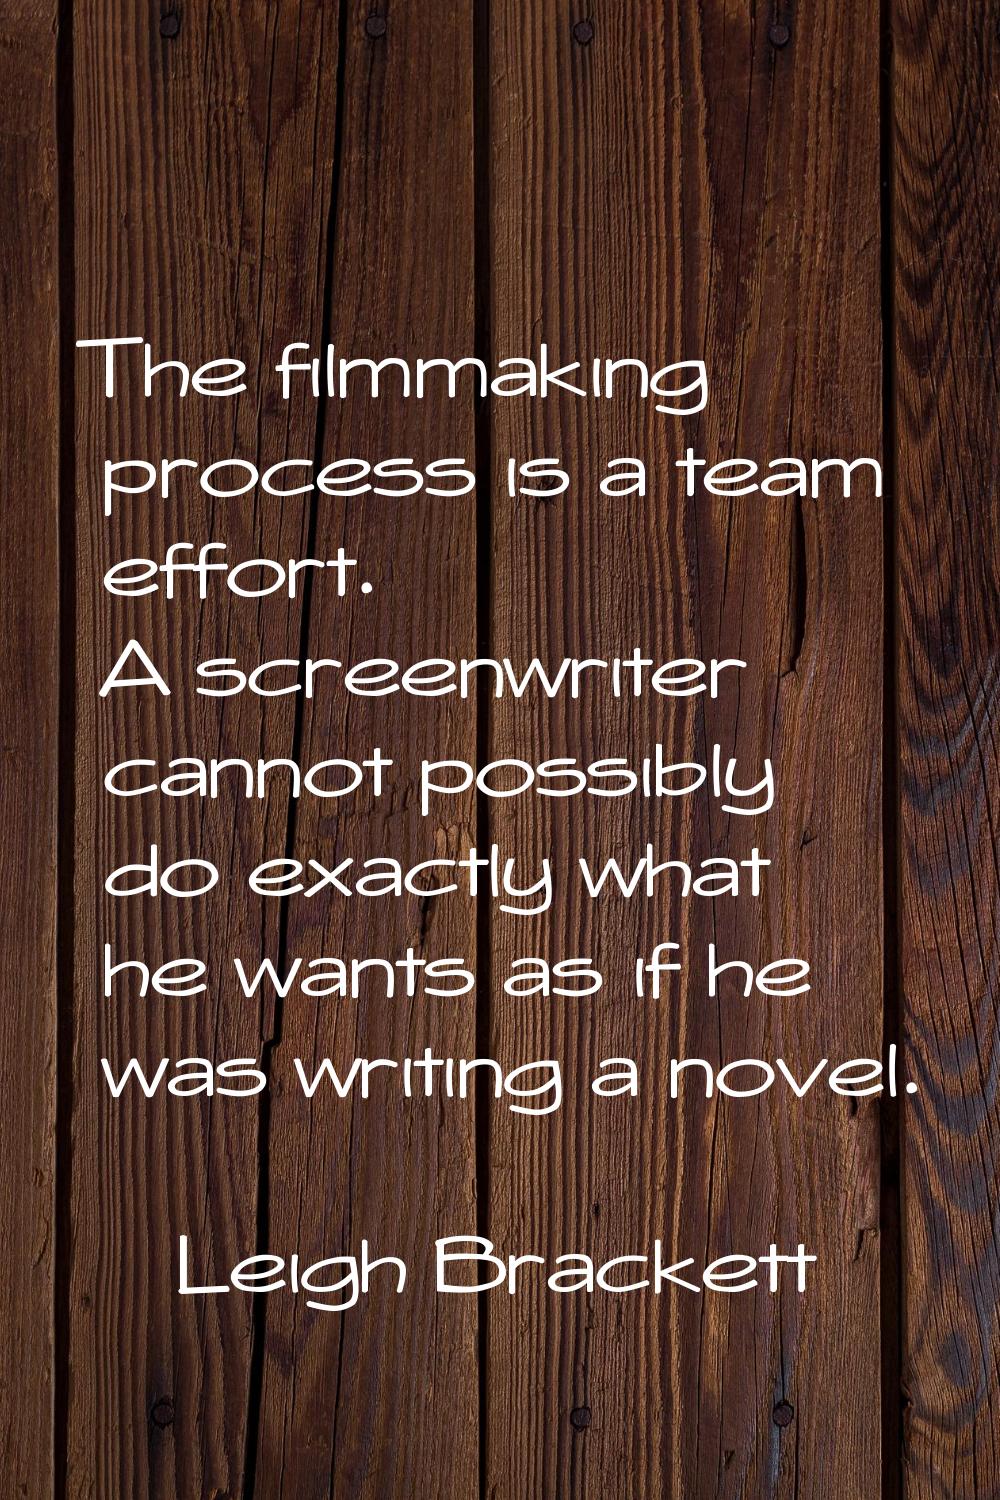 The filmmaking process is a team effort. A screenwriter cannot possibly do exactly what he wants as